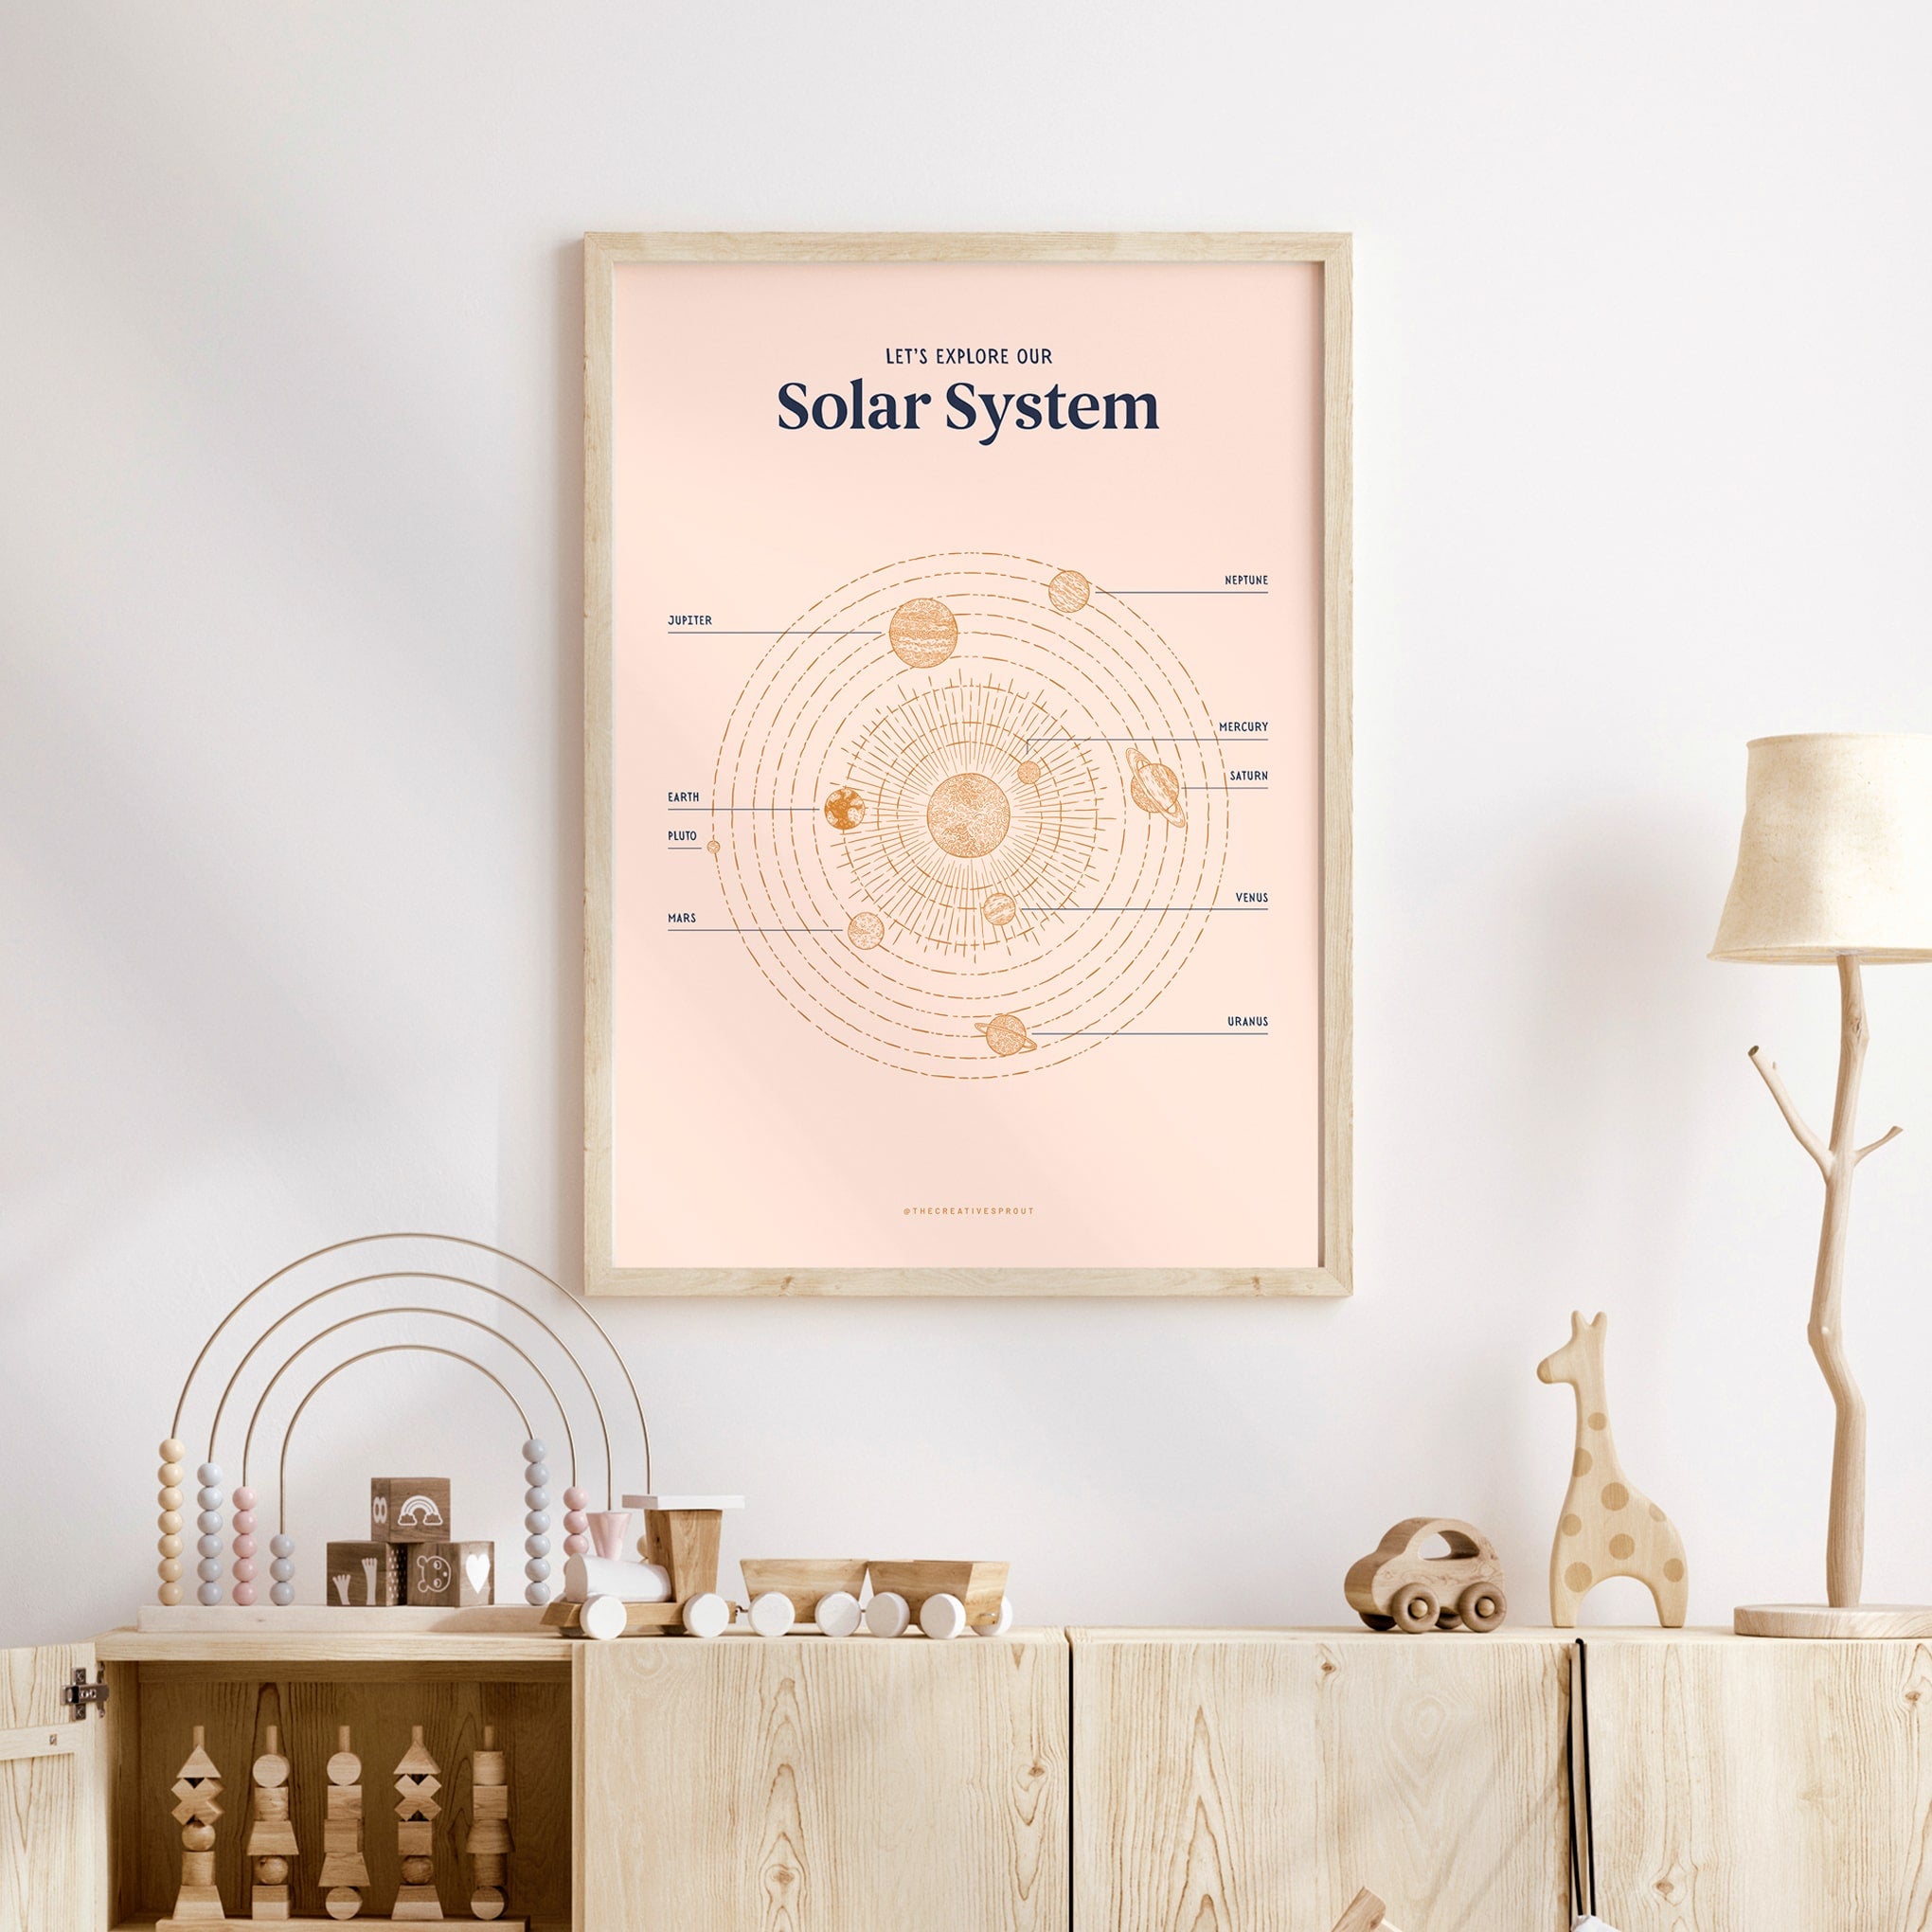 solar system poster in child's playroom